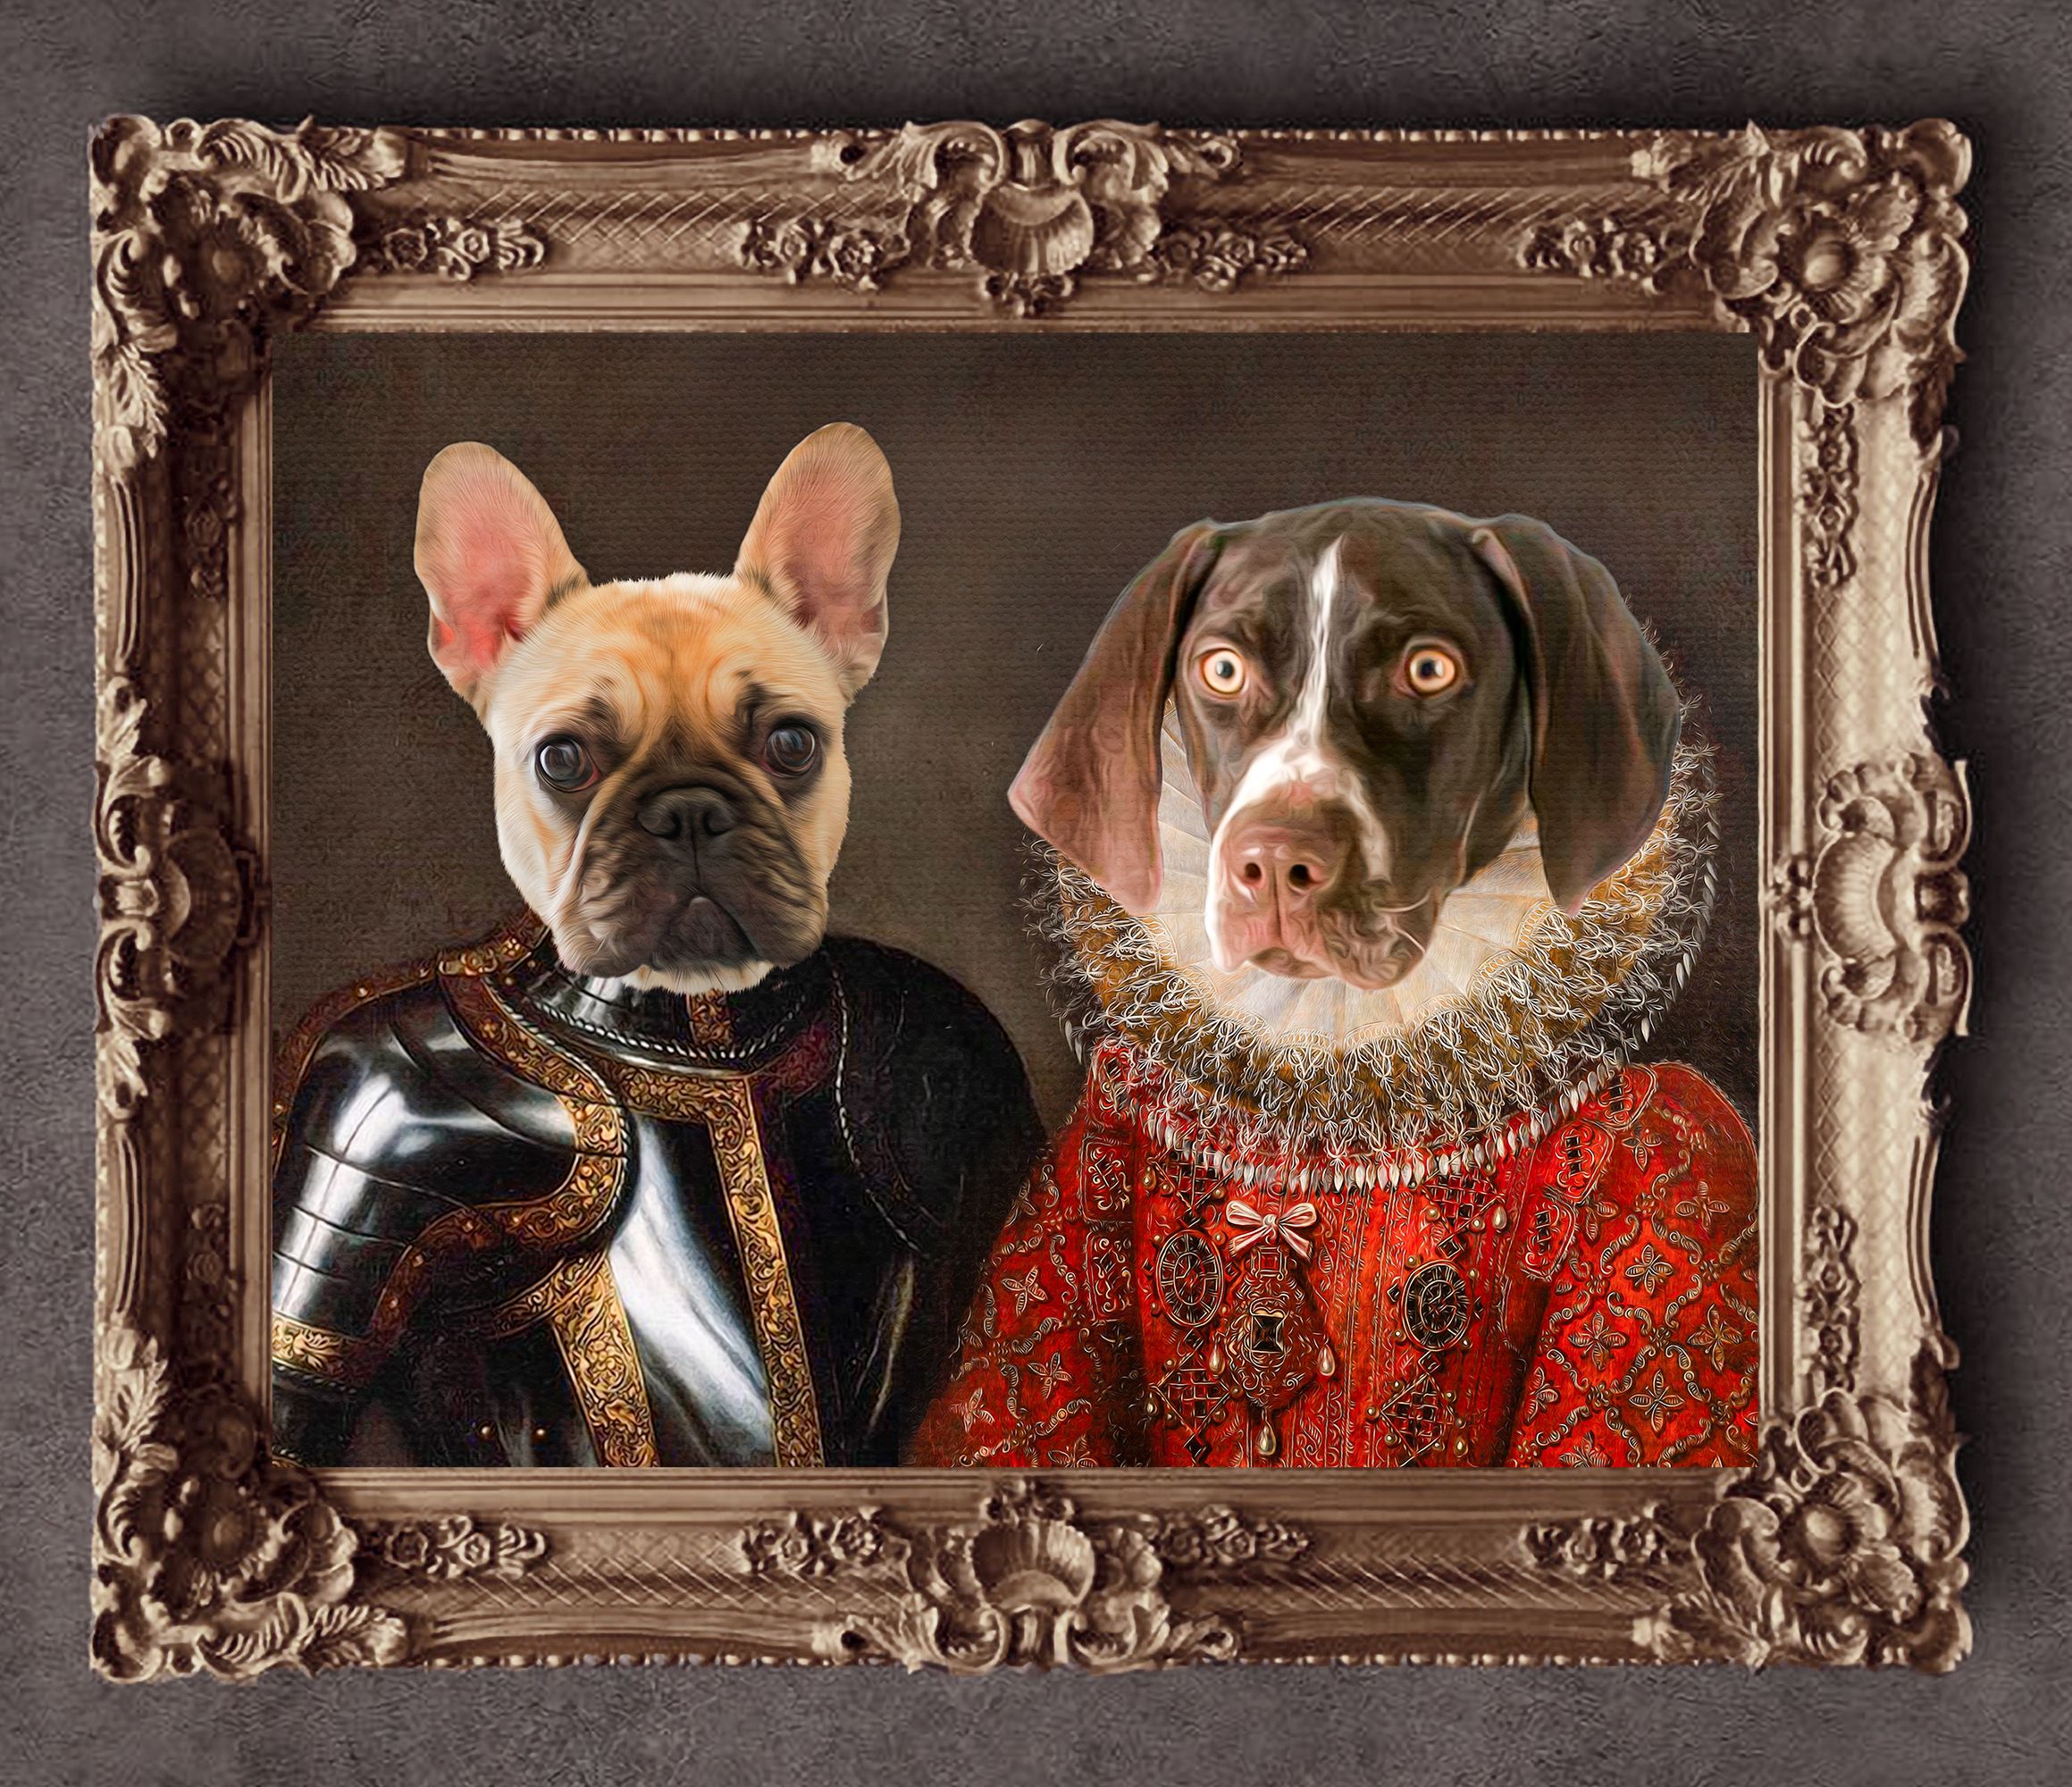 Advantages of gifting personalized dog portraits?